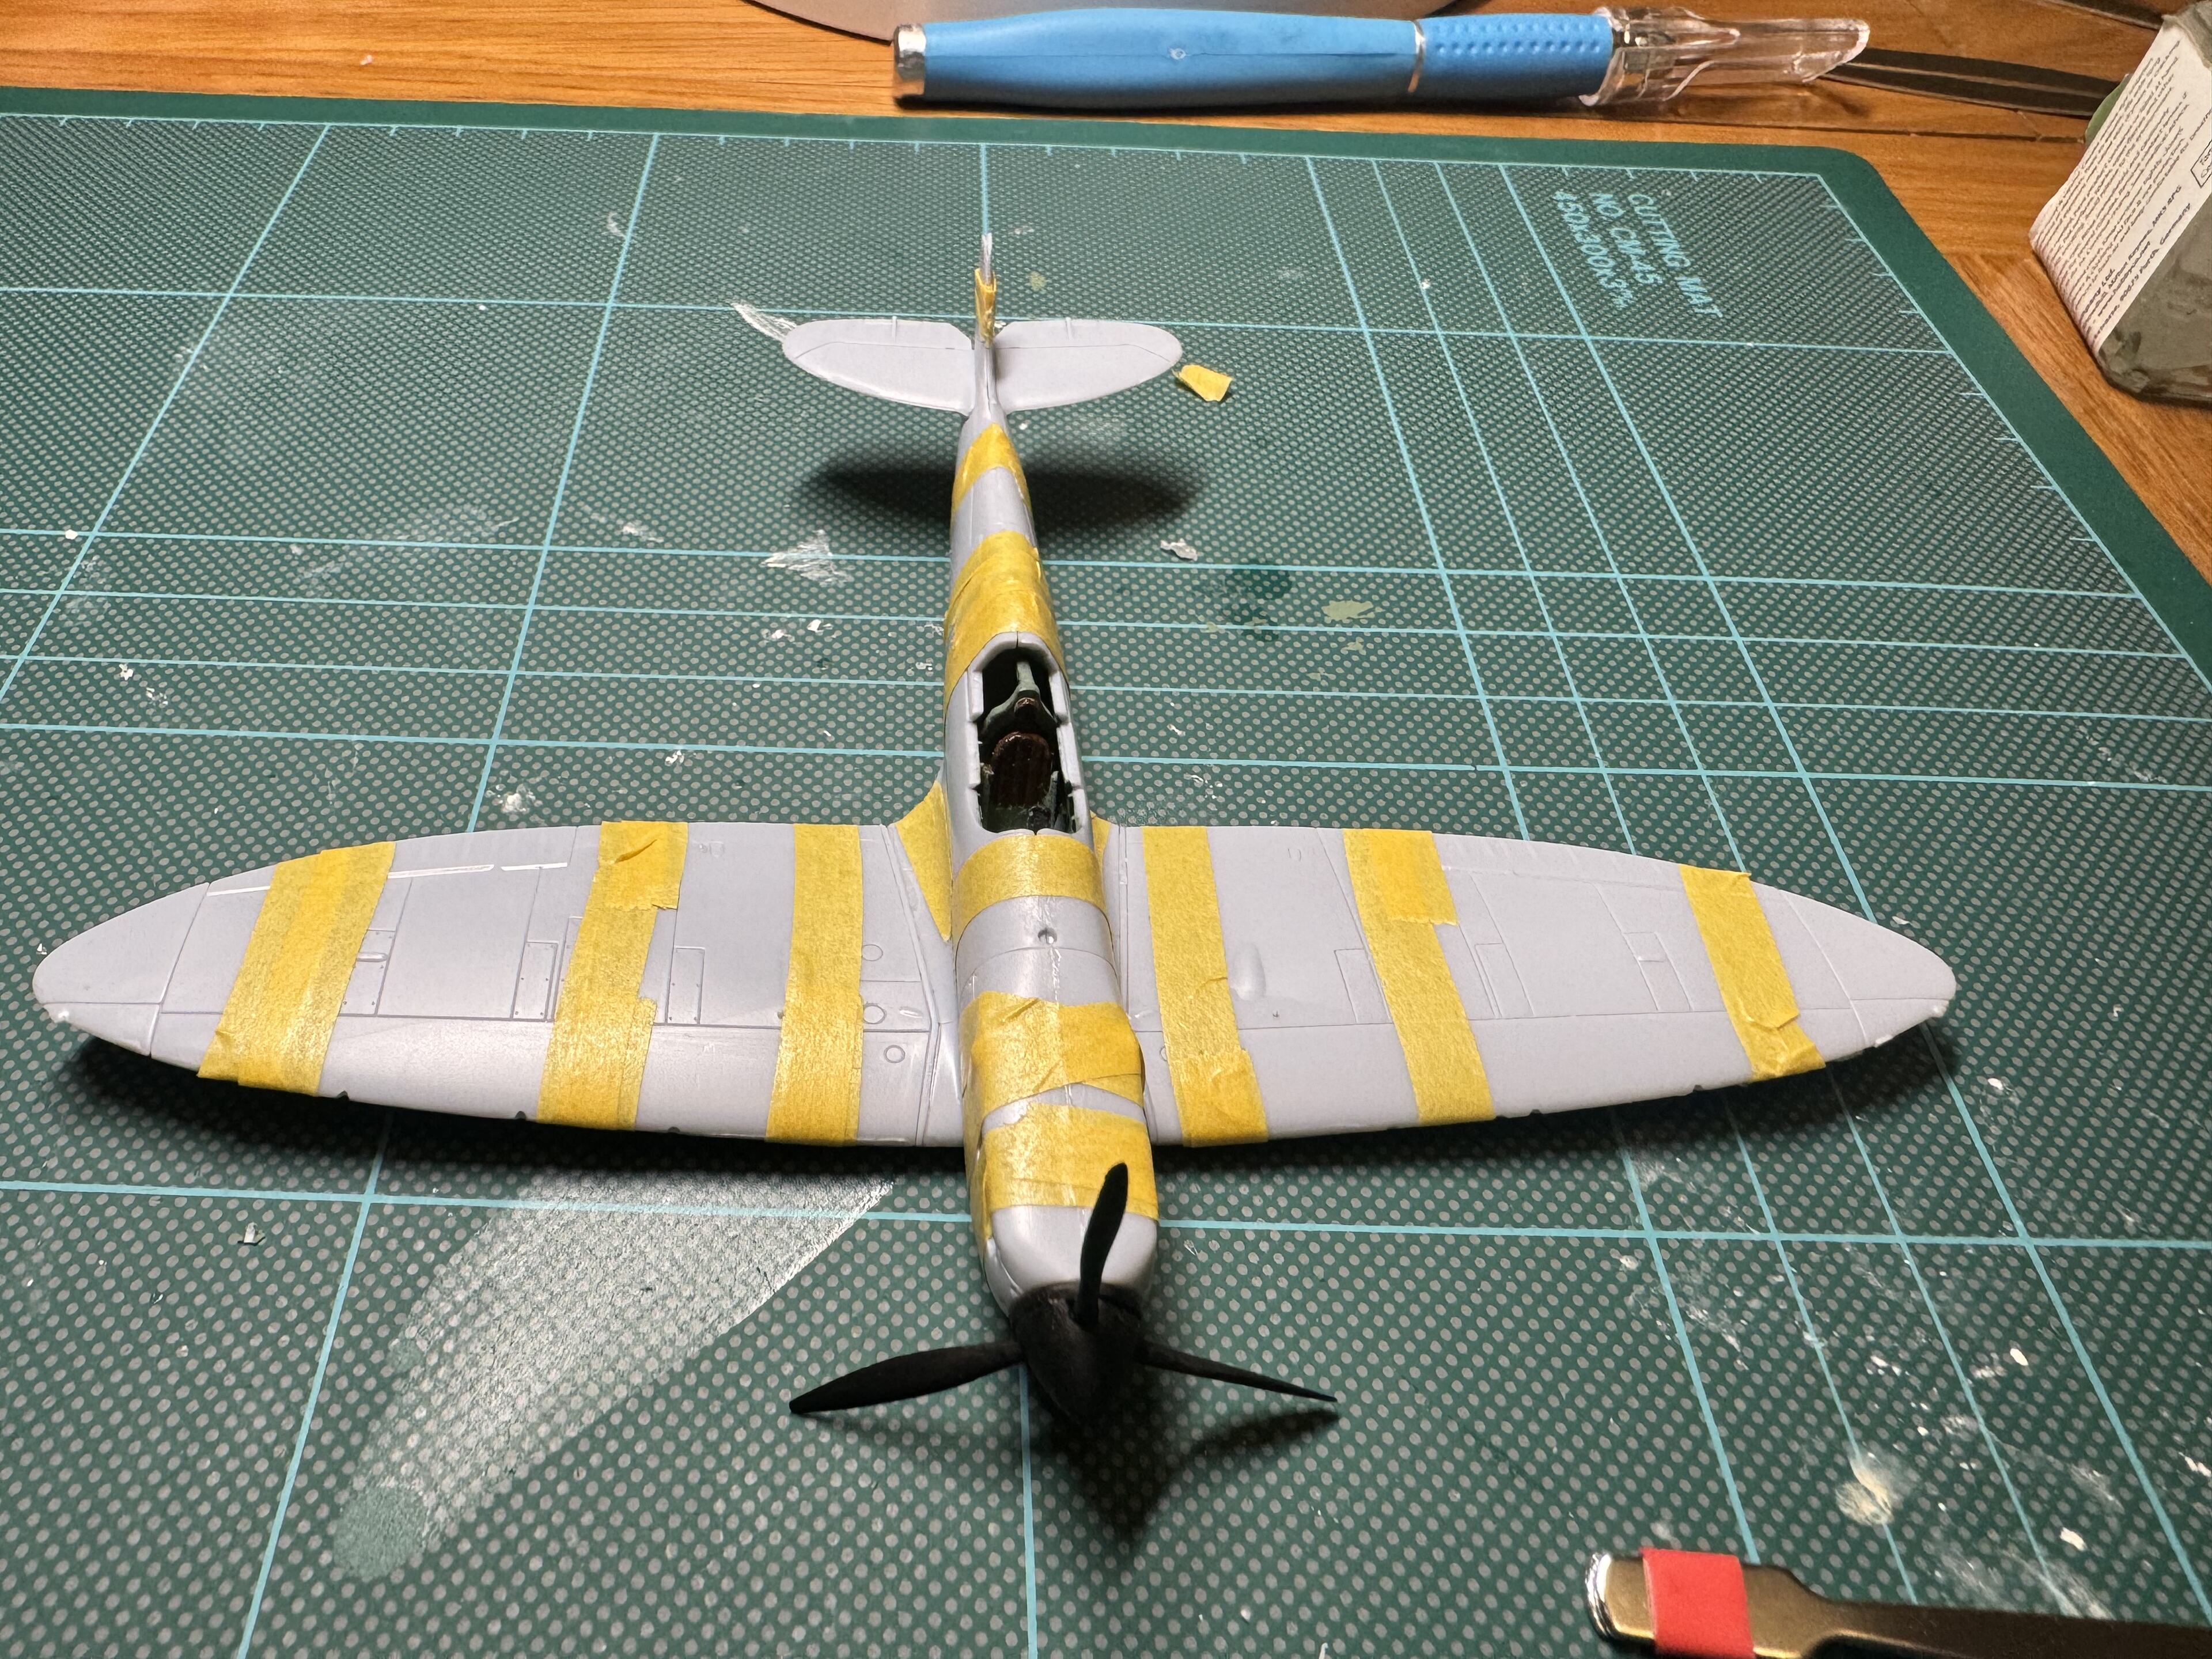 Pistonheads - The image shows a model airplane on a workbench, with tools and equipment scattered around. The airplane is painted in the colors of the British RAF, featuring yellow stripes and camouflage patterns. The workbench itself appears to be made of wood and has some tools on it. There are also various materials and parts visible, suggesting that this could be a work-in-progress or an assembly area for model aircraft.